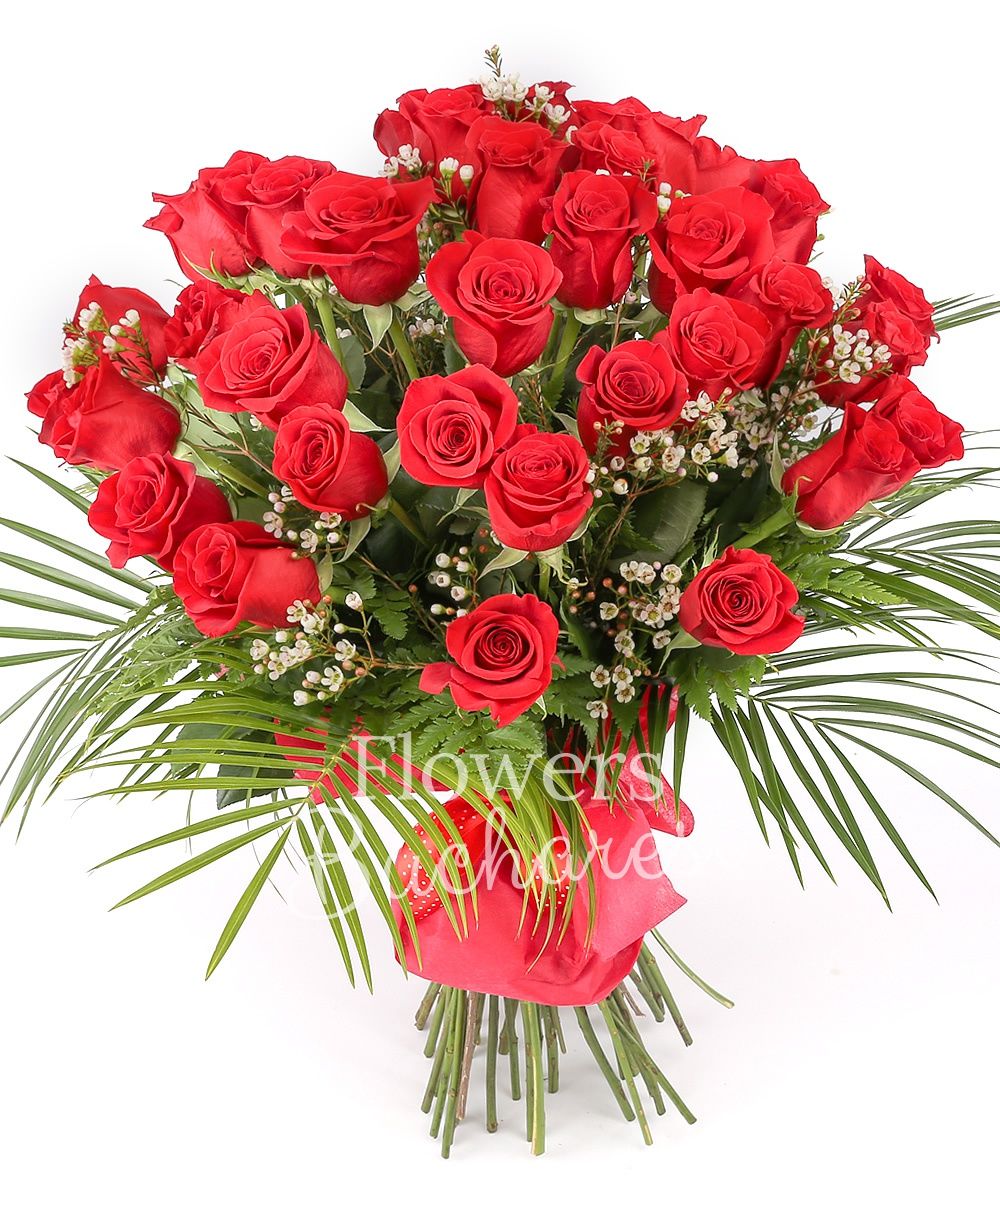 43 red roses, greenery